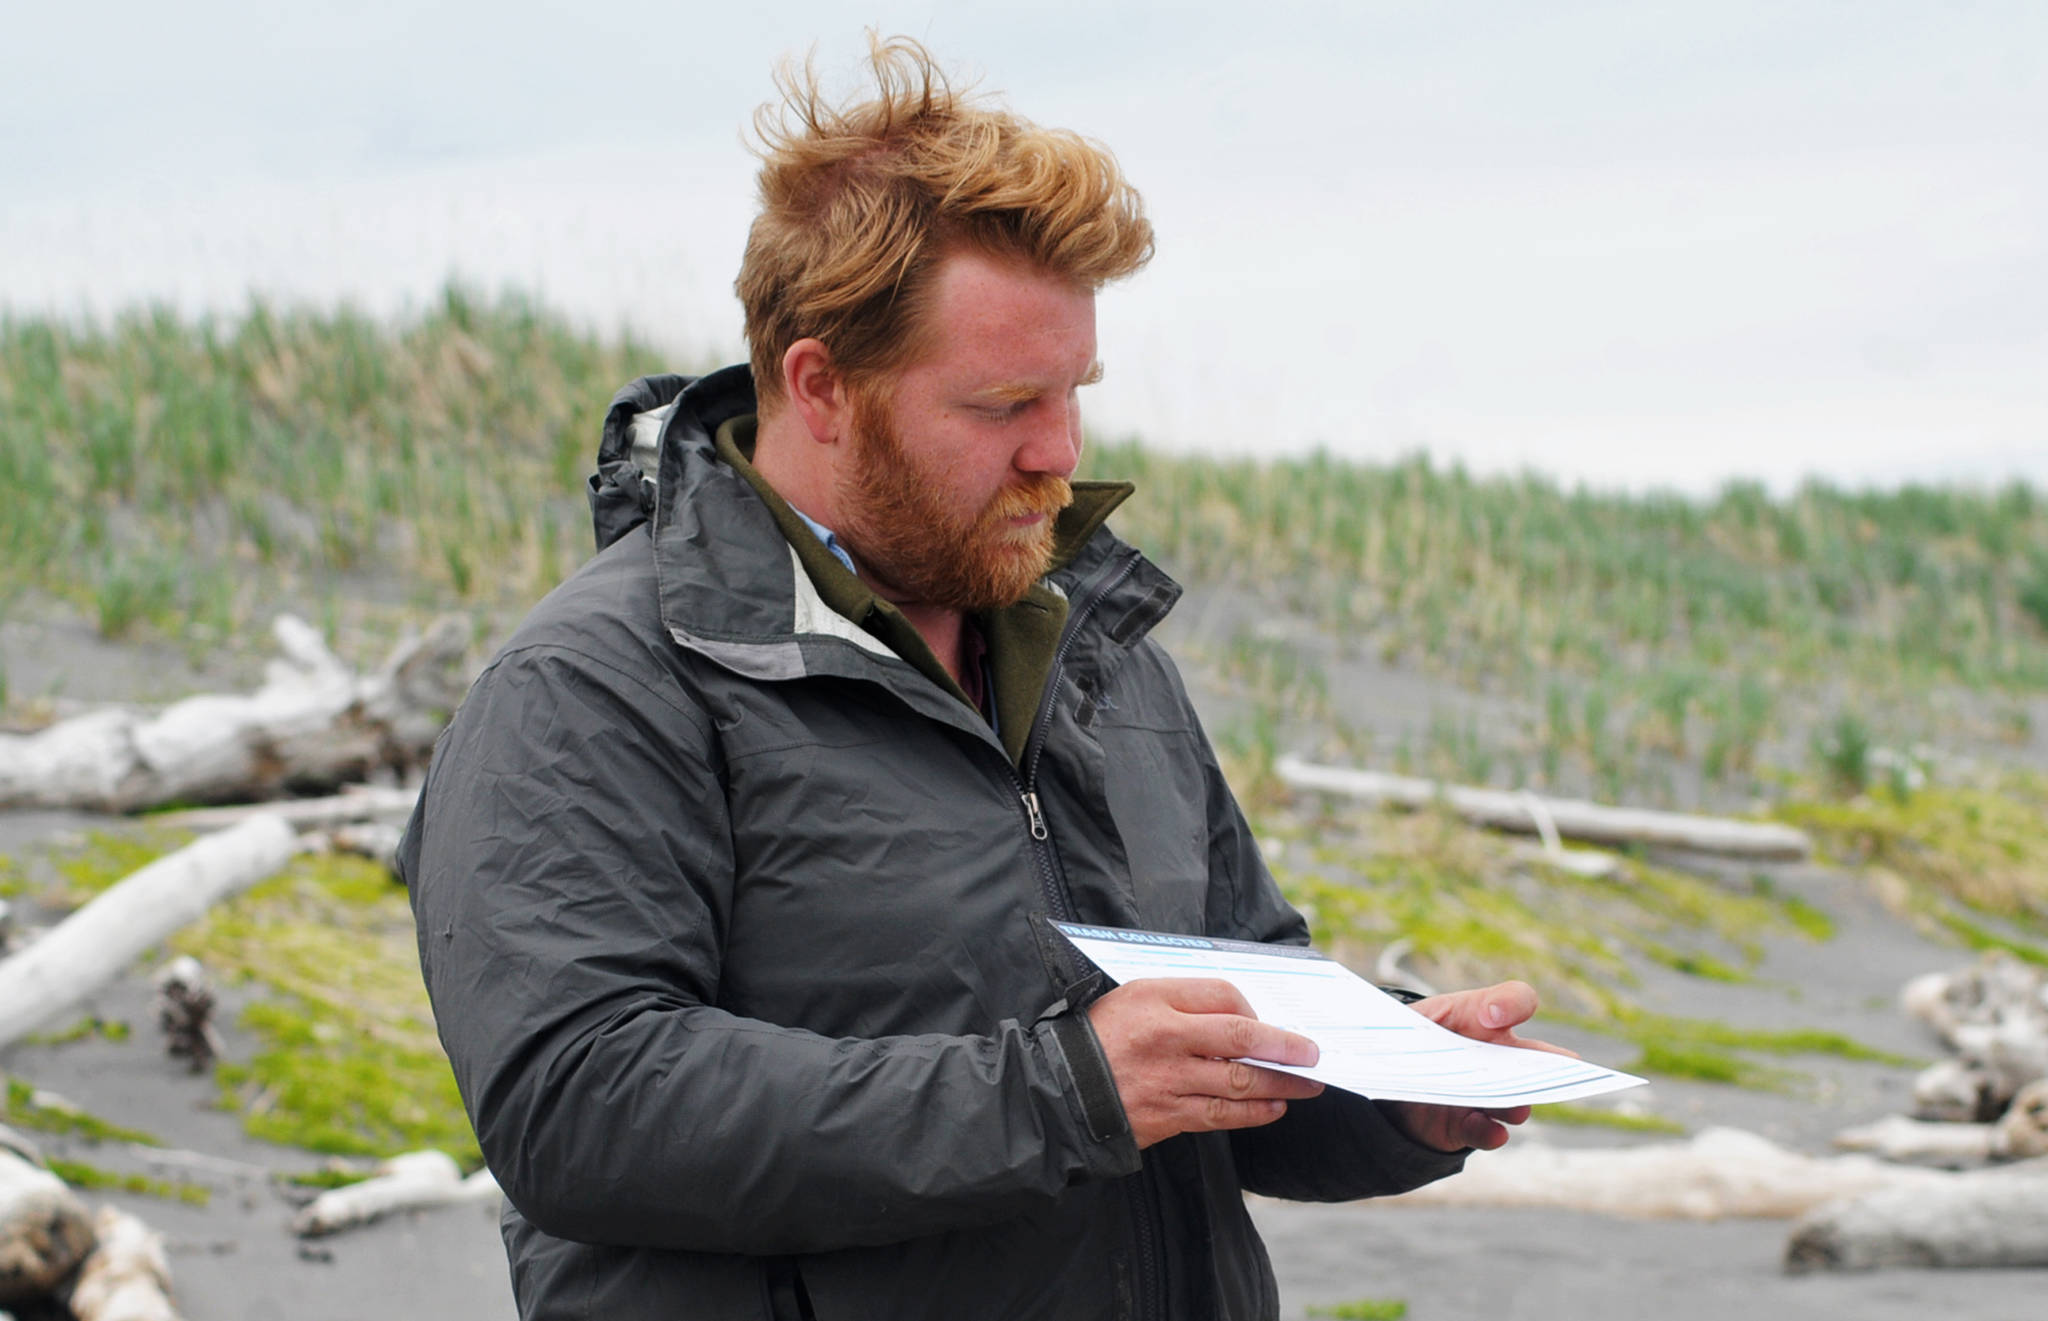 Henry Rieske, the environmental educator and coastwalk coordinator with the Homer-based Center for Alaskan Coastal Studies, explains an International Coastal Cleanup data sheet before sending groups out to gather marine debris from the beach on Sunday, June 3, 2017 on Augustine Island, Alaska. The center coordinated a trip to the island to clean up trash from the beaches of the remote island in Cook Inlet. (Elizabeth Earl/Peninsula Clarion)  Henry Rieske, the environmental educator and coastwalk coordinator with the Homer-based Center for Alaskan Coastal Studies, explains an International Coastal Cleanup data sheet before sending groups out to gather marine debris from the beach on Sunday on Augustine Island. The center coordinated a trip to the island to clean up trash from the beaches of the remote island in Cook Inlet. (Elizabeth Earl/Peninsula Clarion)